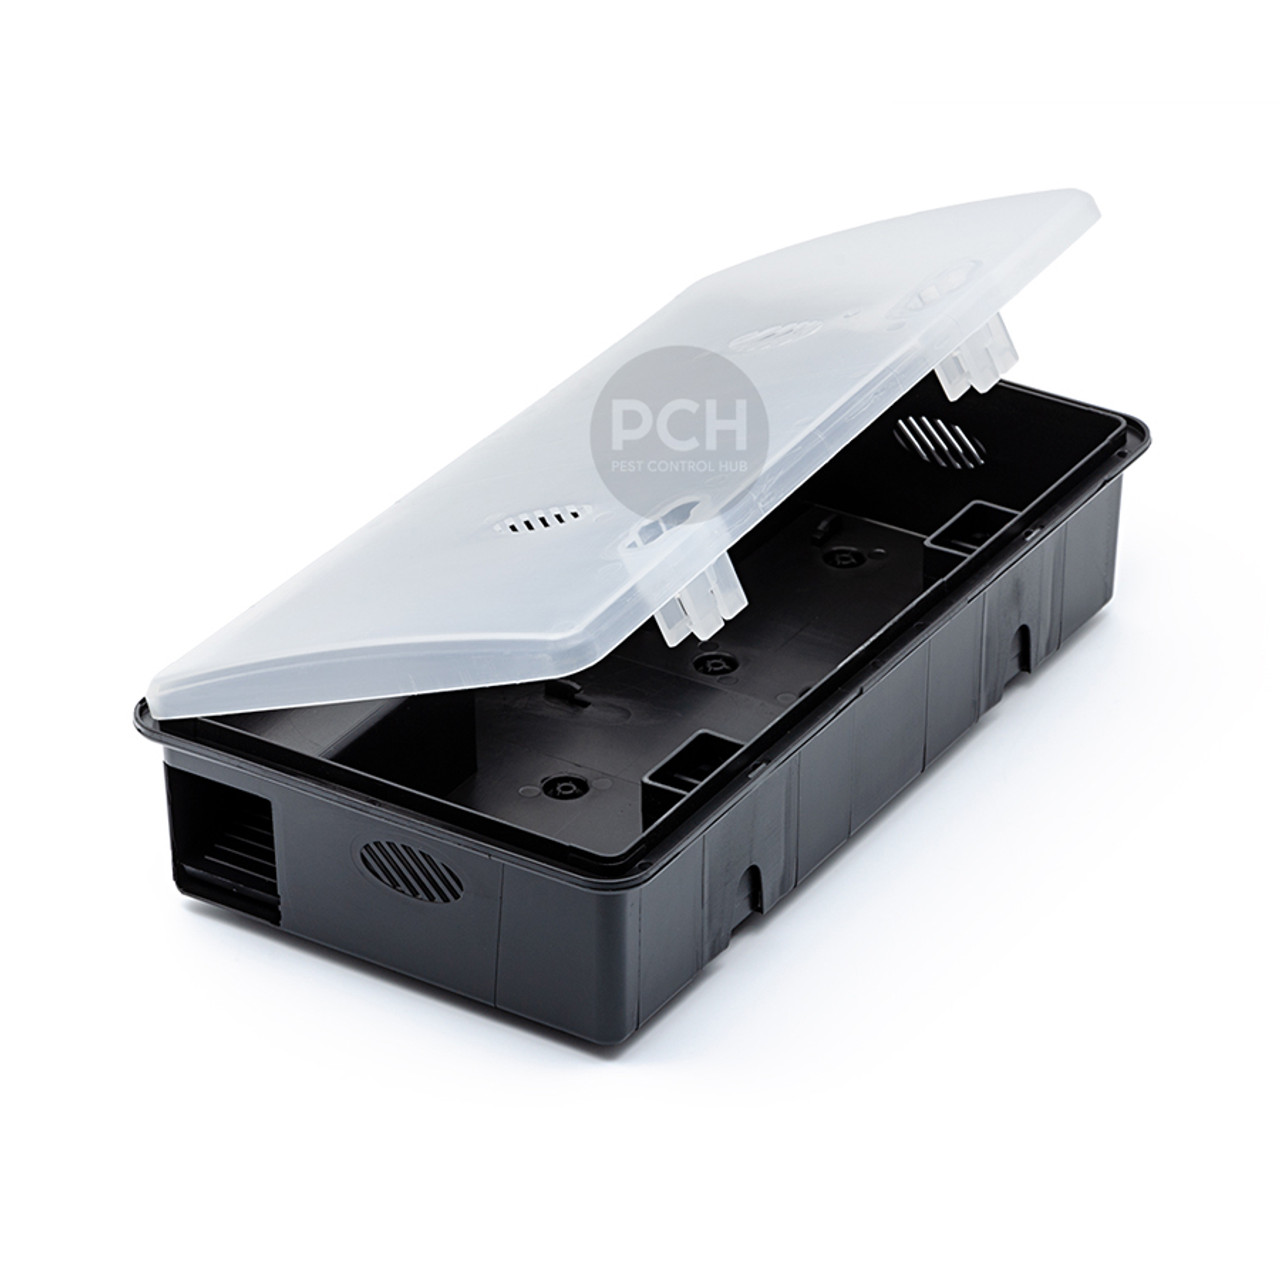 https://cdn11.bigcommerce.com/s-lmuttm1jiv/images/stencil/1280x1280/products/310/1078/Mastertrap_MPS_Self_Setting_Multi_Catch_Mouse_Bait_Station_with_Snap_Traps_View_Clear__96702.1564701841.jpg?c=2